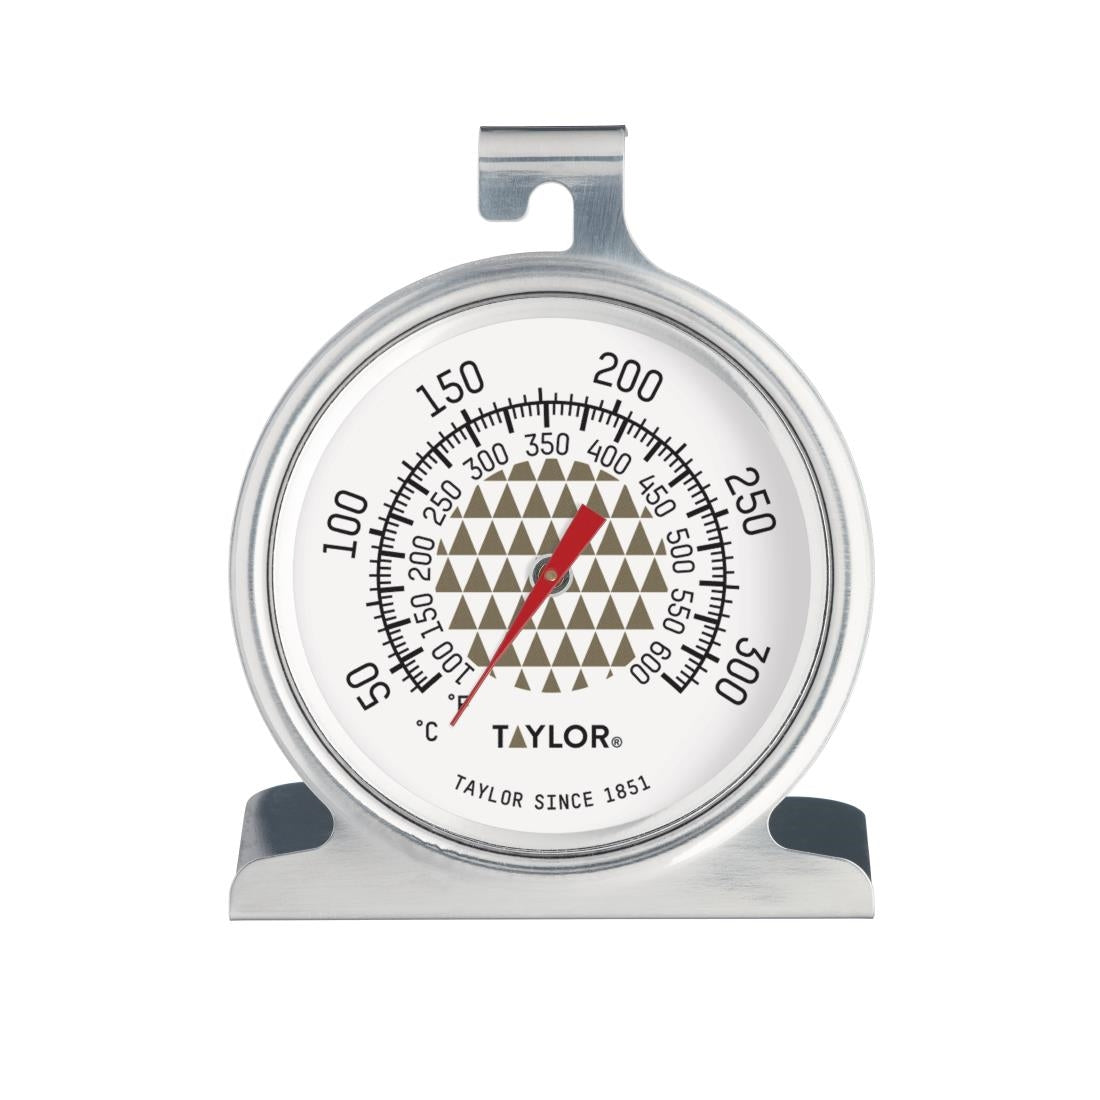 FW781 Taylor Oven Thermometer JD Catering Equipment Solutions Ltd